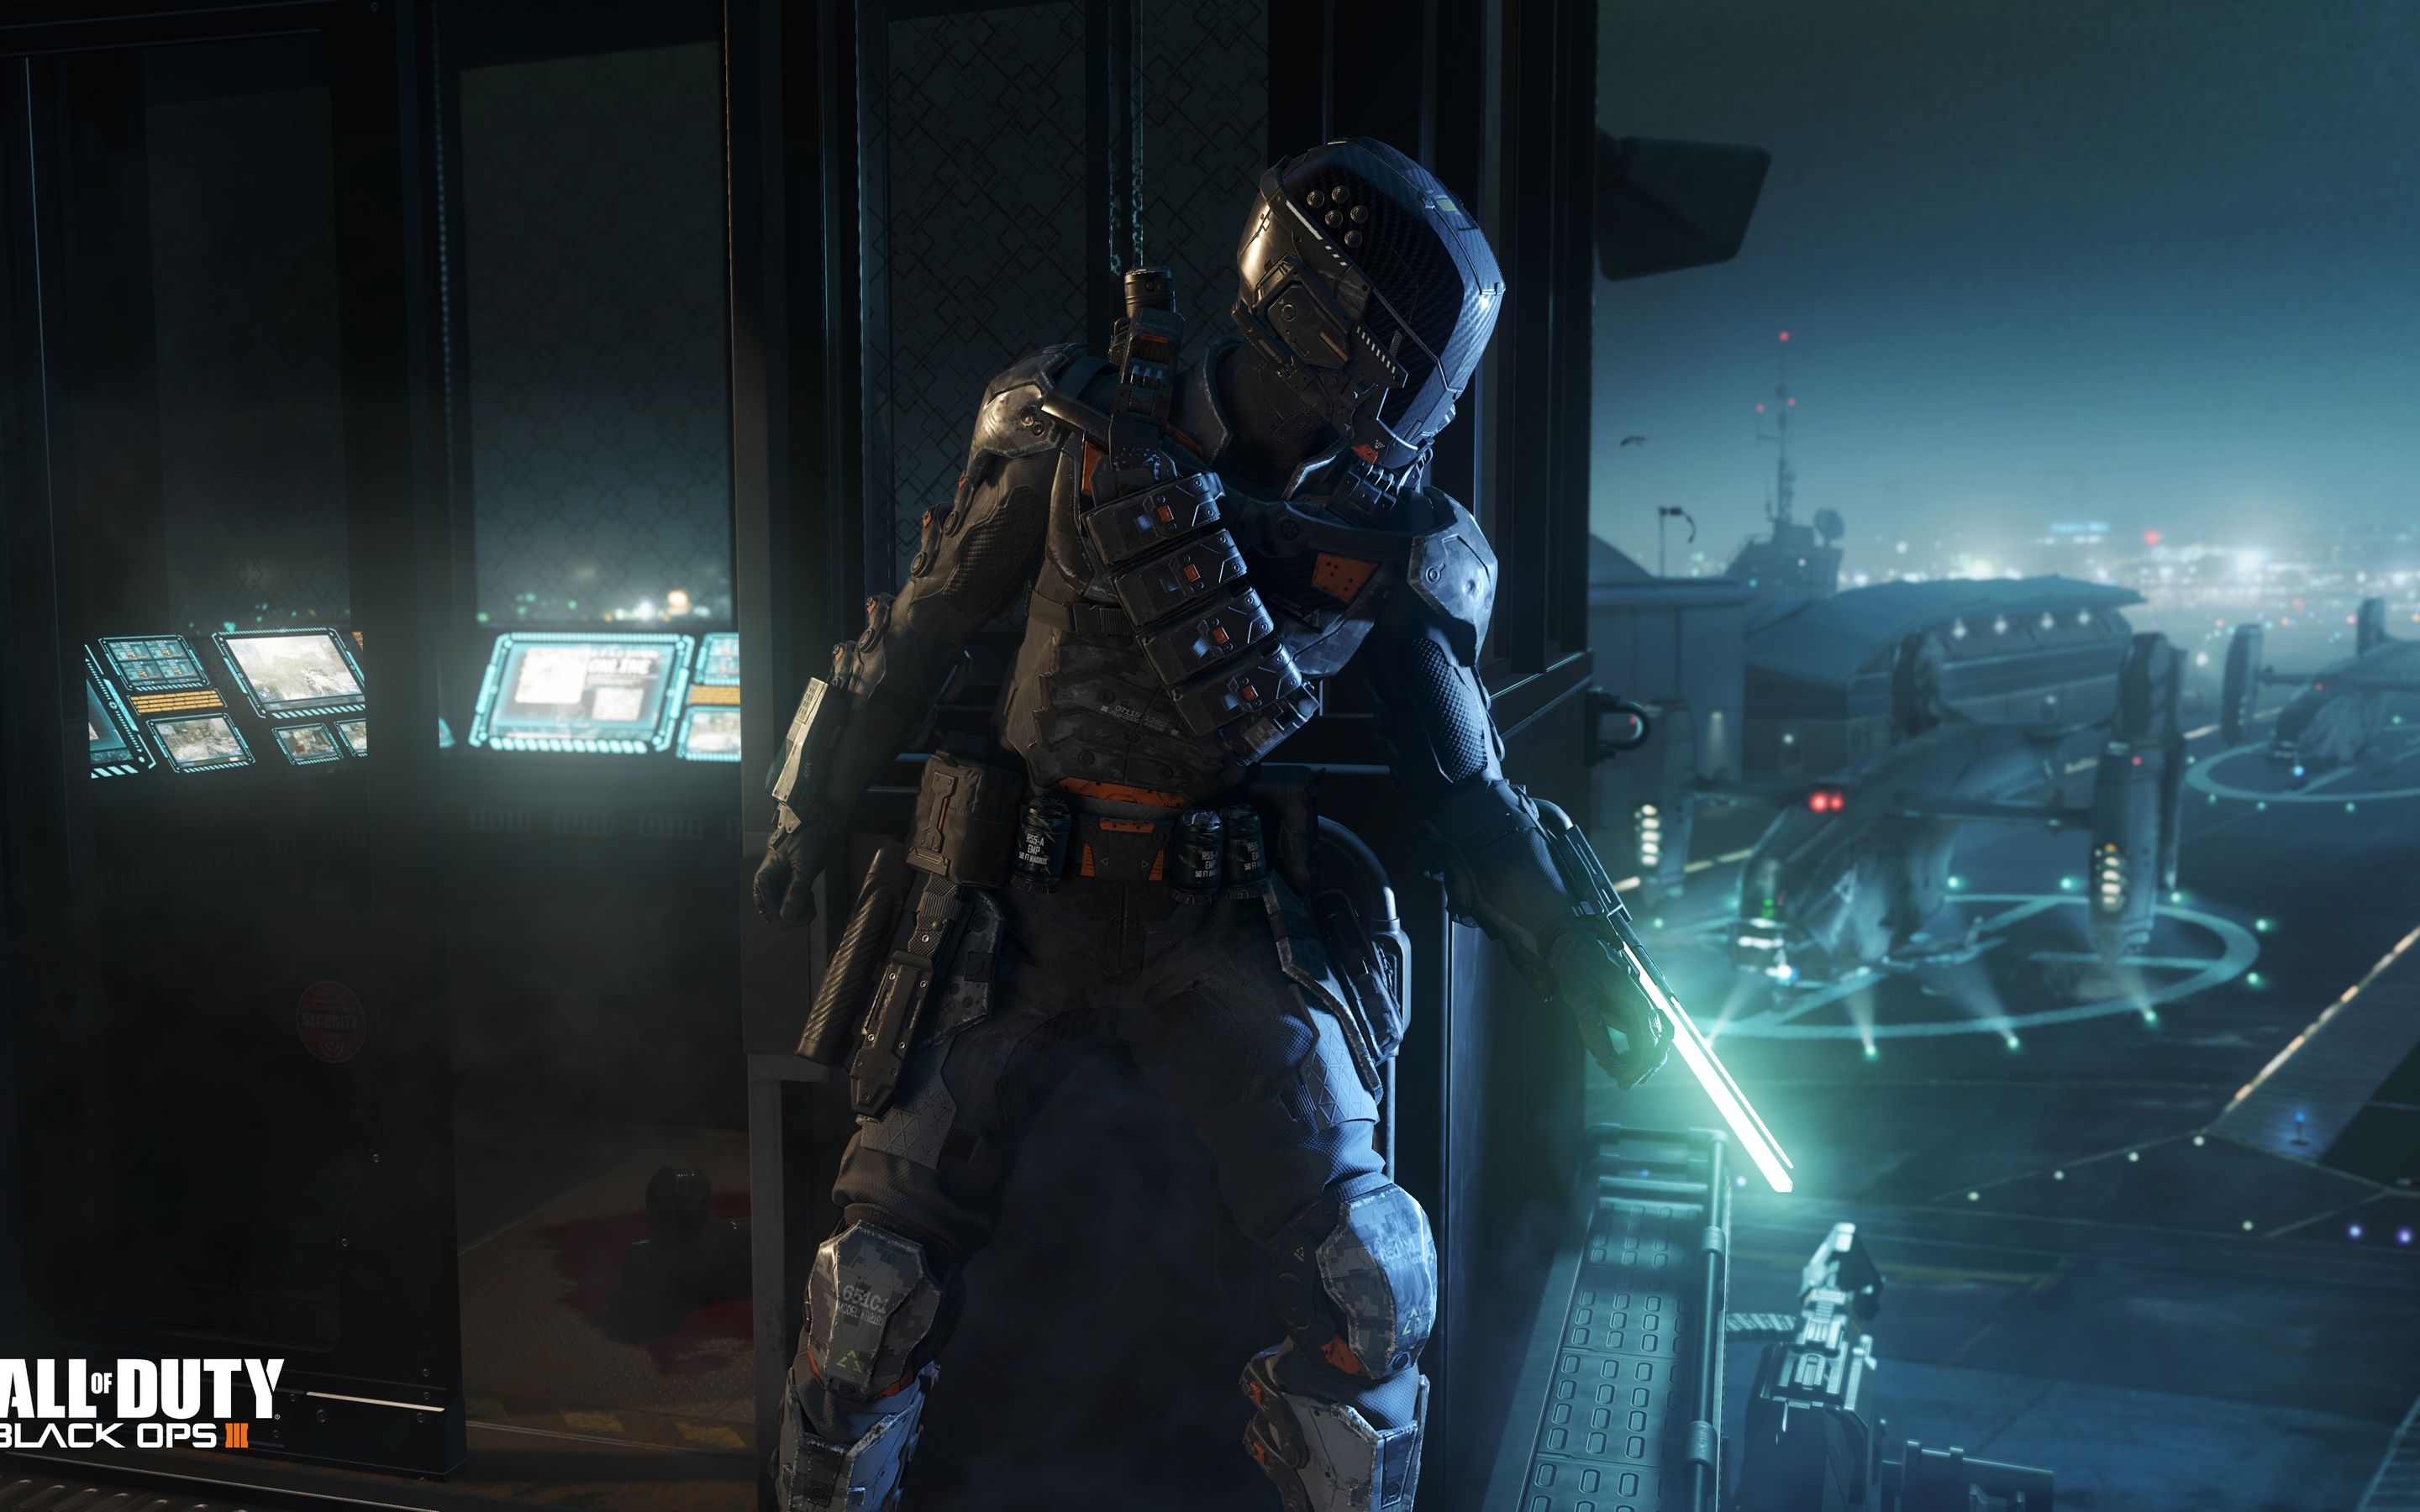 Call of Duty Black Ops 3 Specialist Spectre for 2880 x 1800 Retina Display resolution